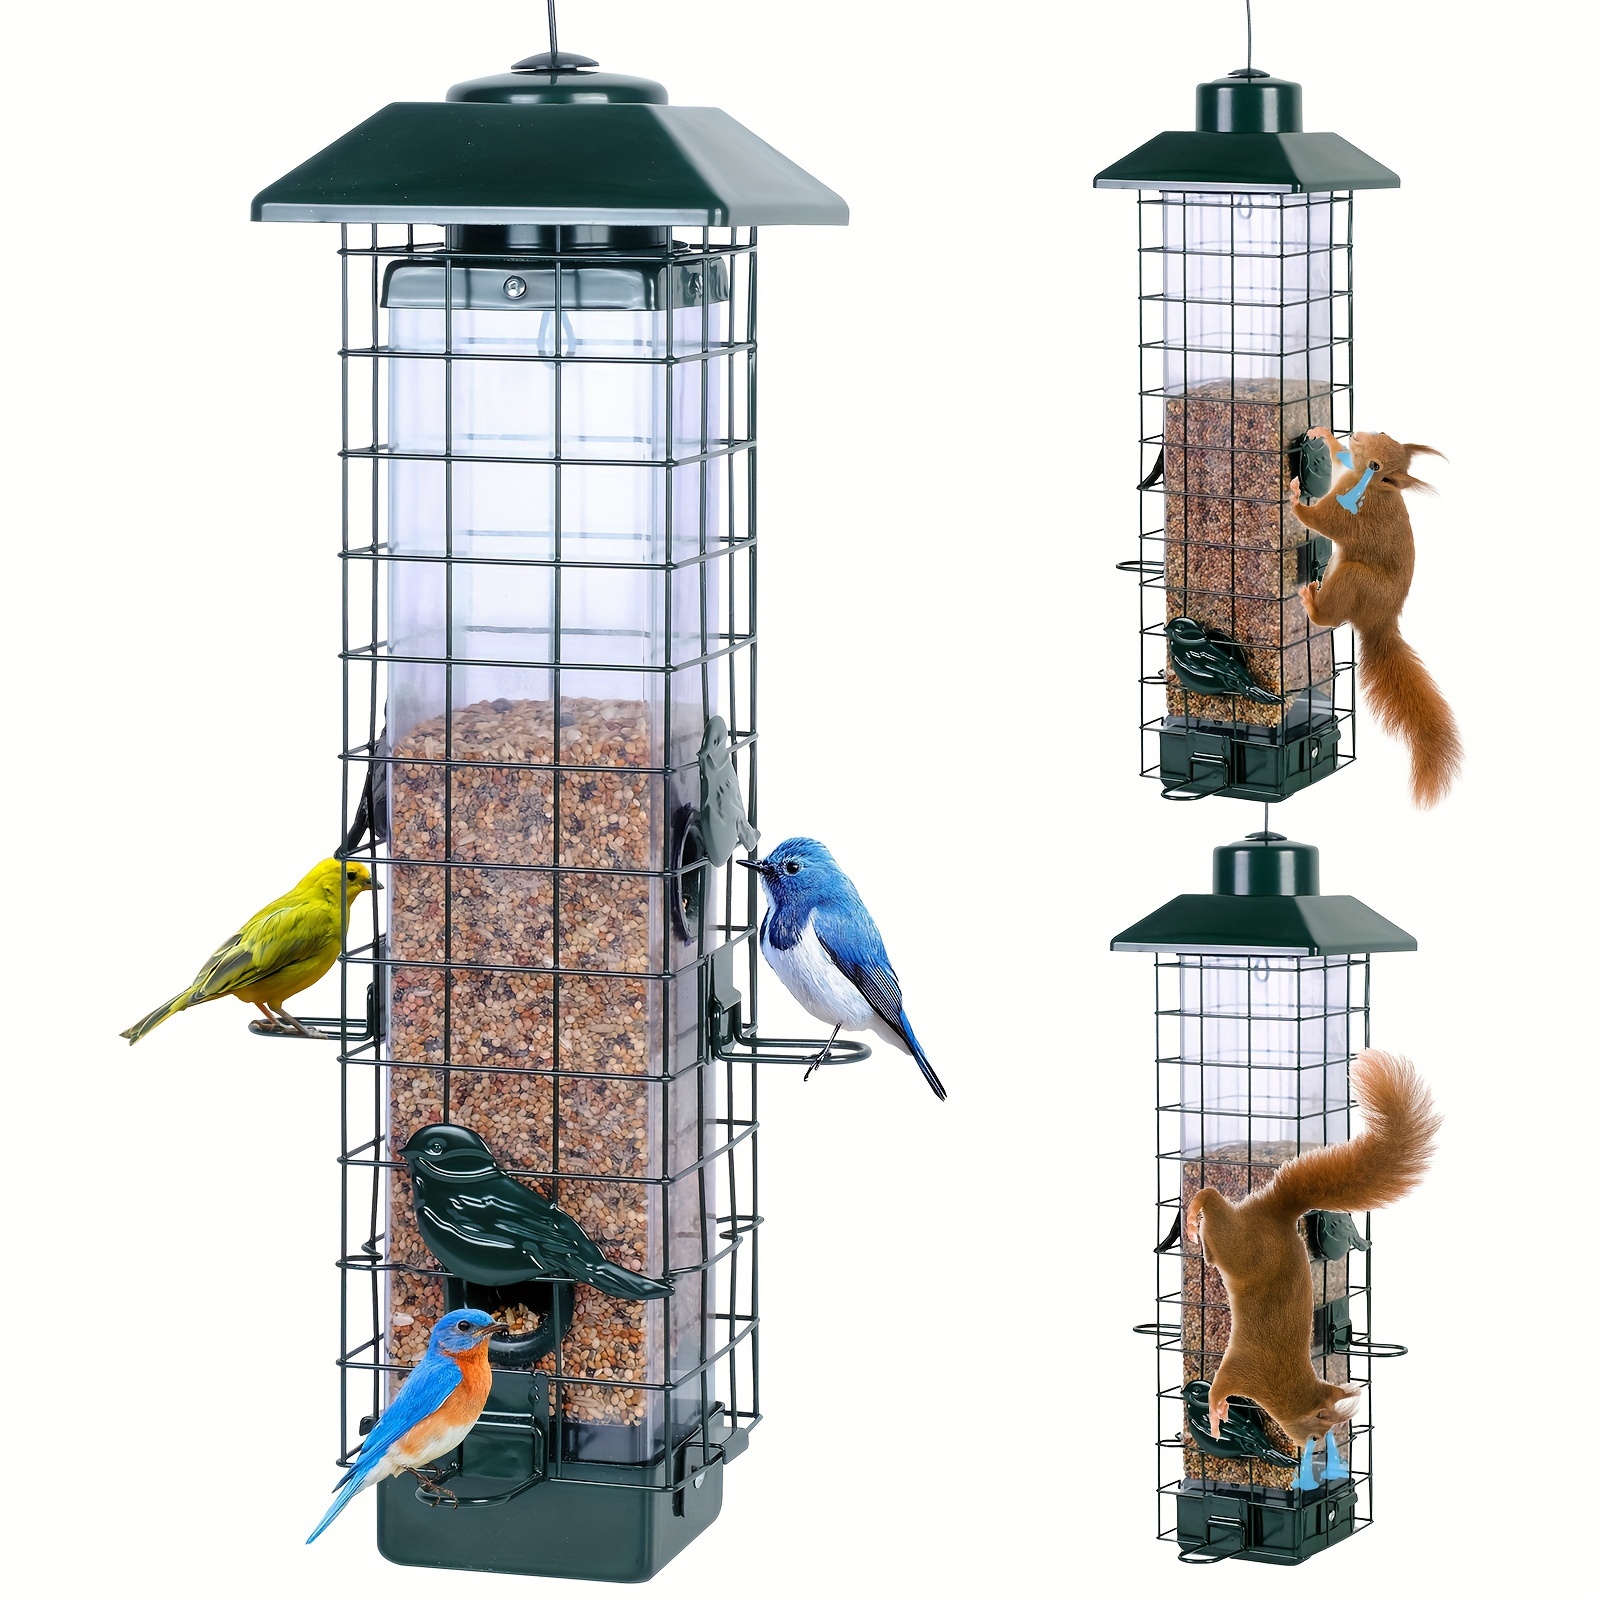 

1pc Squirrel Proof Bird Feeder For Outdoors Hanging, Metal Bird Feeder With Bilateral Weight, Large Capacity Outdoor Bird Feeders For Finch Sparrow Blue Jay